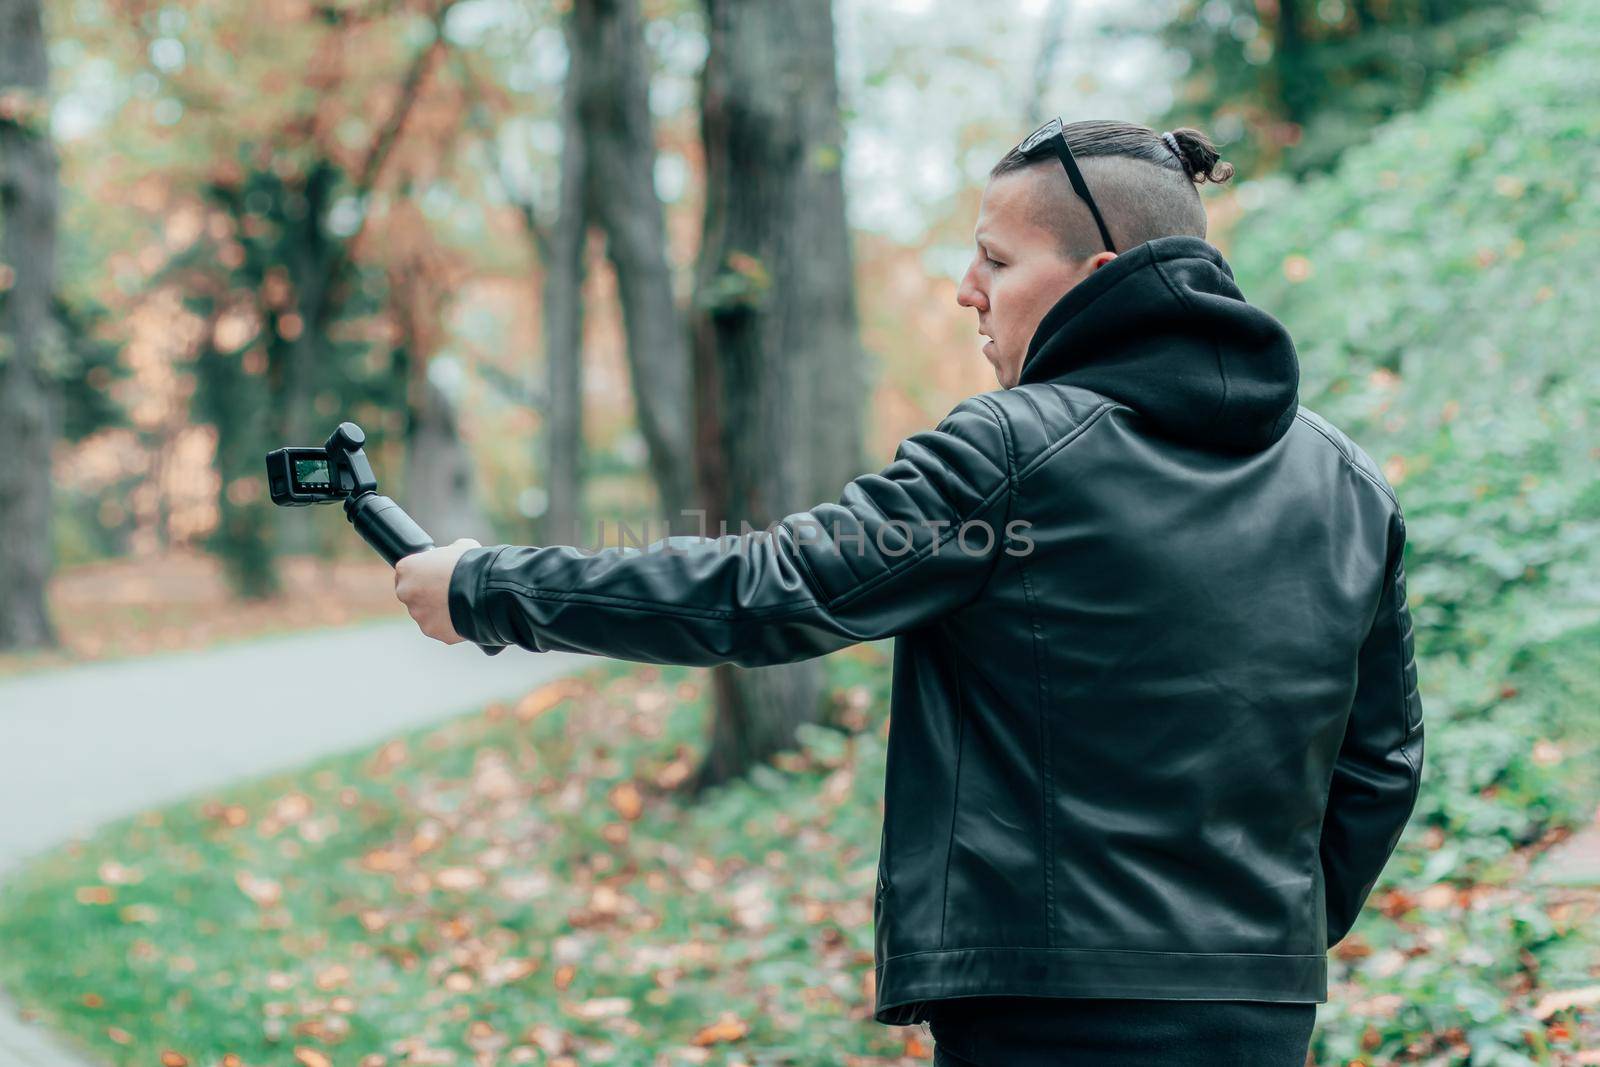 Blogger in Black Clothes and Sunglasses Making Video Using Action Camera with Gimbal Camera Stabilizer in Autumn Park